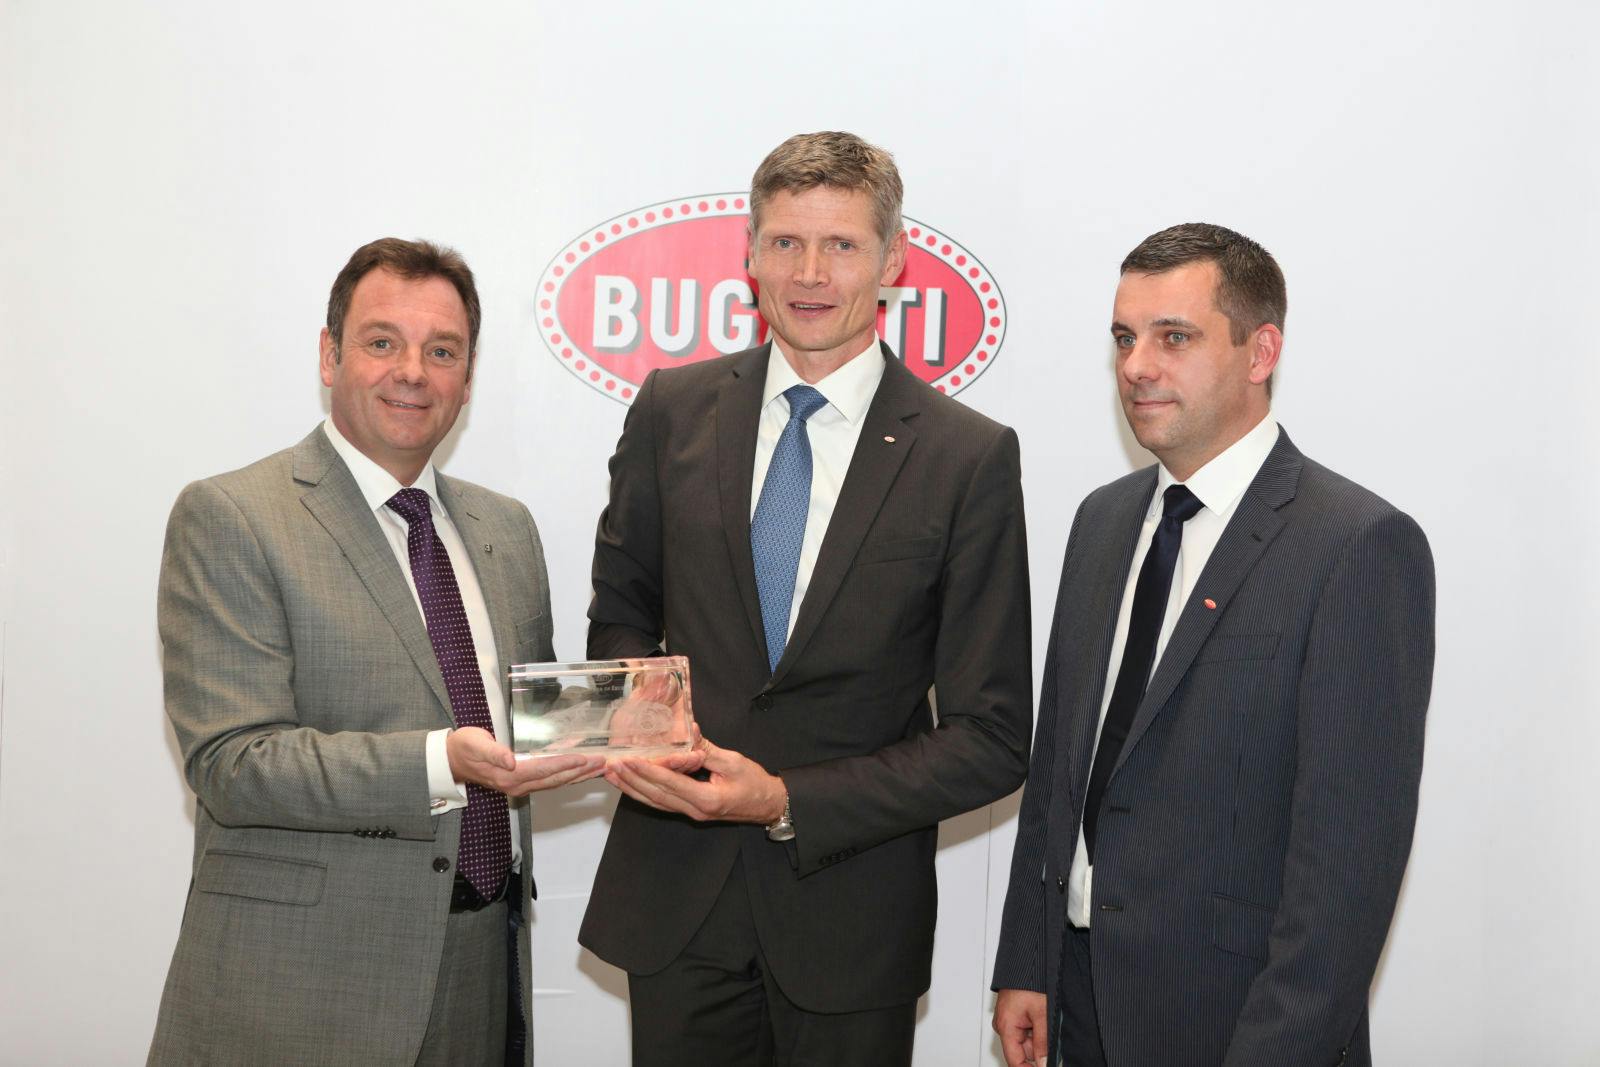 Joerg Maschwitz (centre), Director of Customer Service at Bugatti, presents the award “Service Partner of Excellence” to George Duncan, Director of Al Habtoor Motors – Bugatti Dubai. On the right: Sean Michael Jackson, After Sales Manager Al Habtoor Motors – Bugatti Dubai